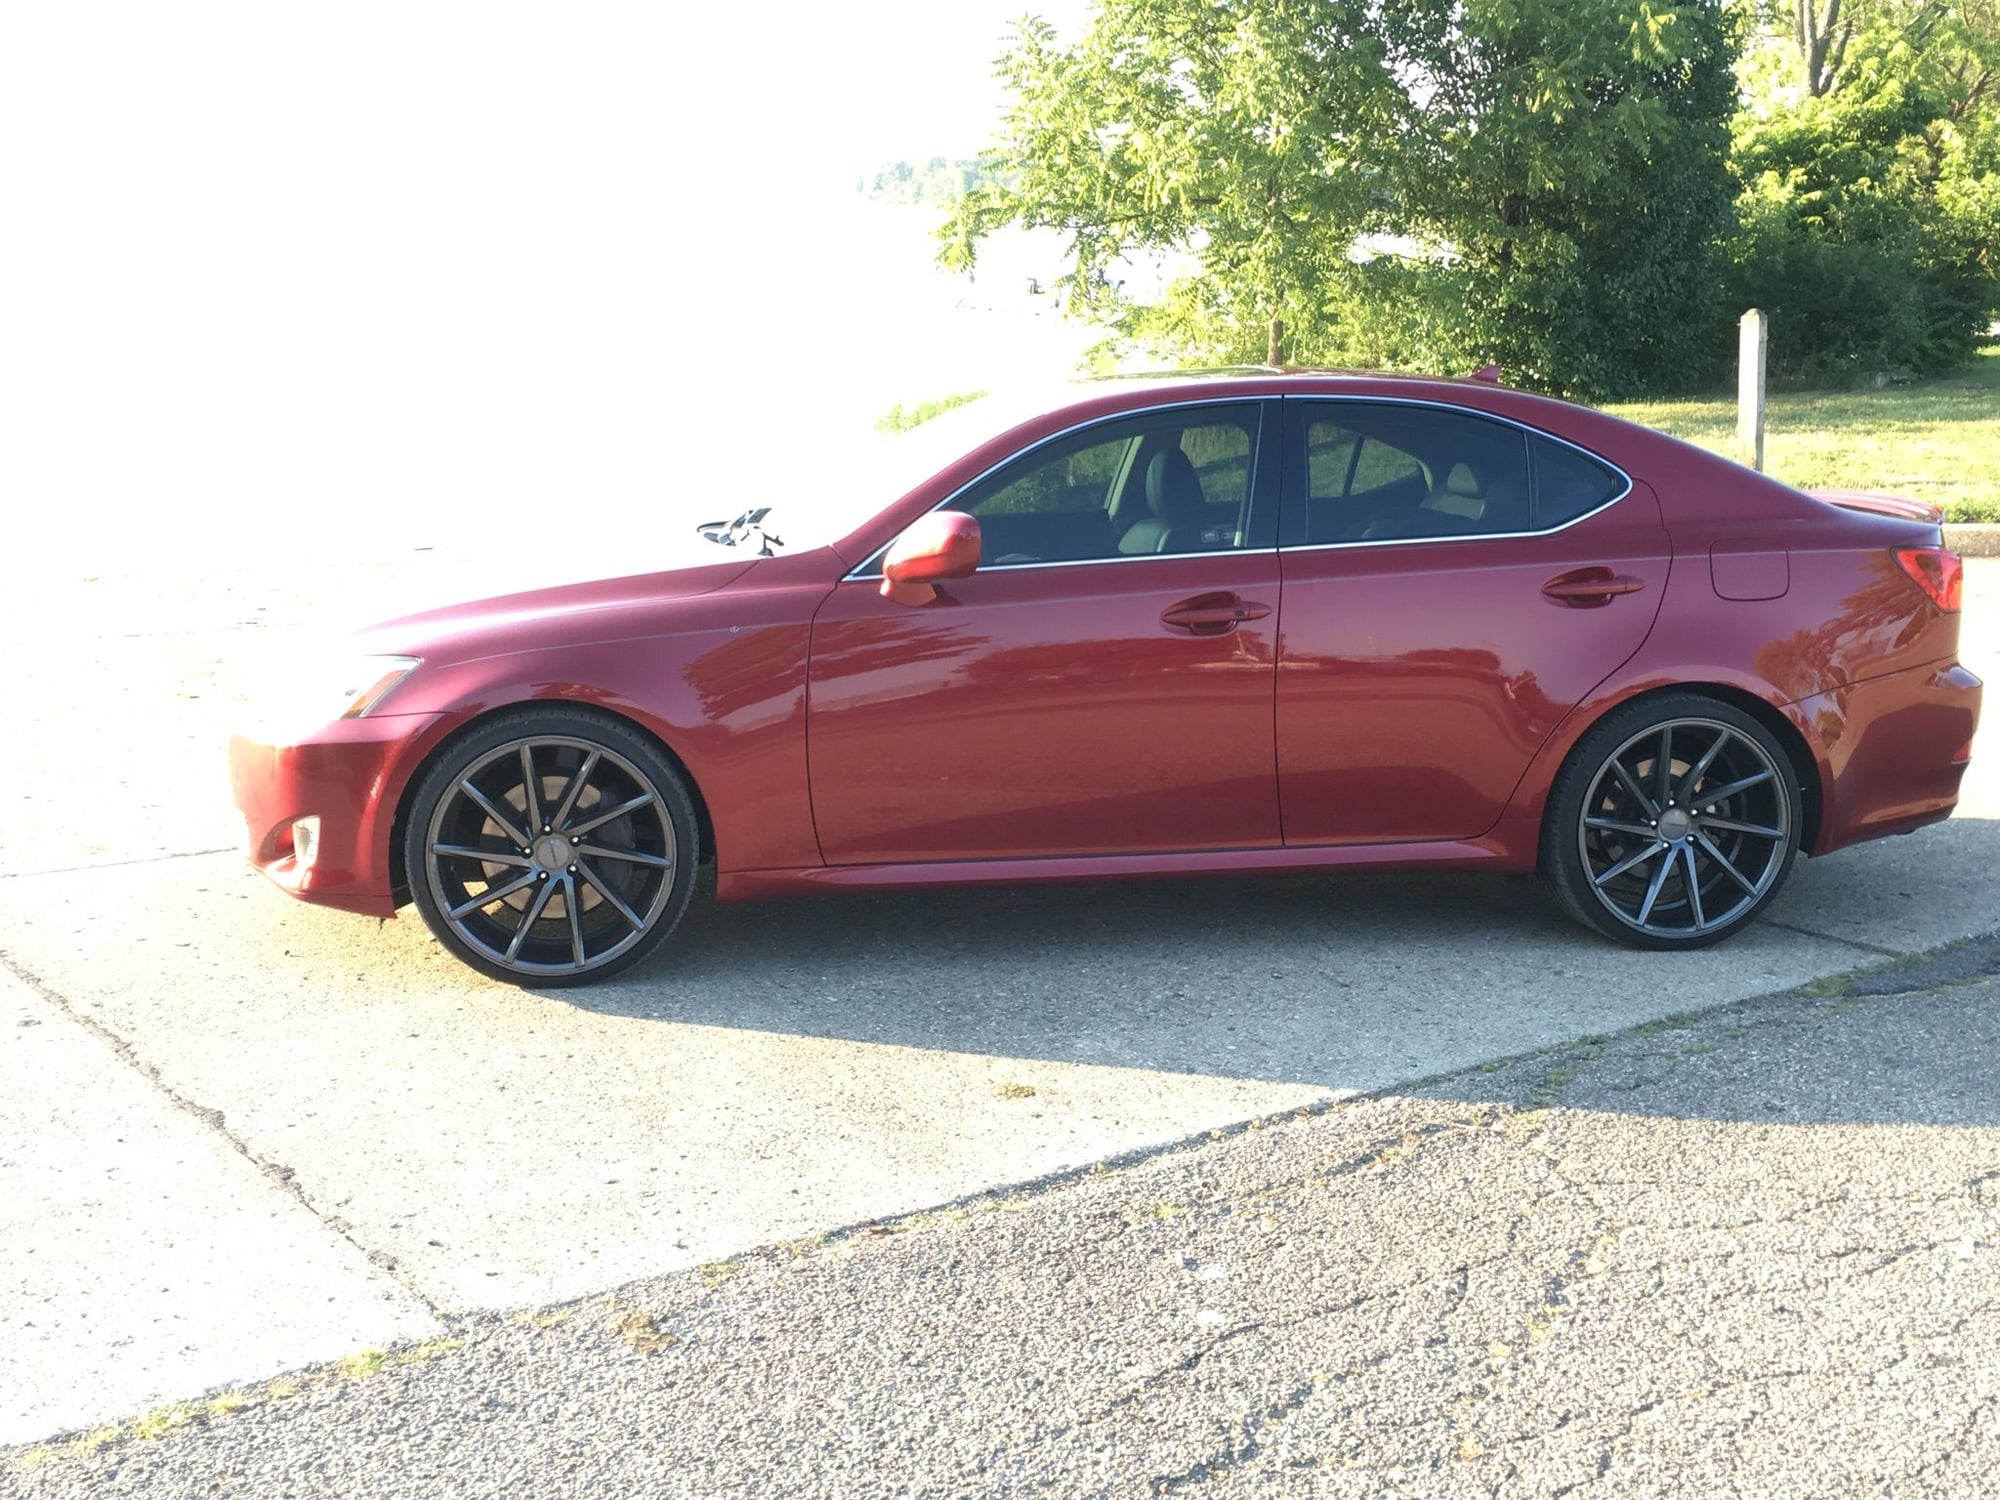 2008 Lexus IS350 - 08 IS350 Low Miles - Used - VIN JTHBE262985019187 - 48,000 Miles - 6 cyl - 2WD - Automatic - Sedan - Red - Indianapolis, IN 46228, United States